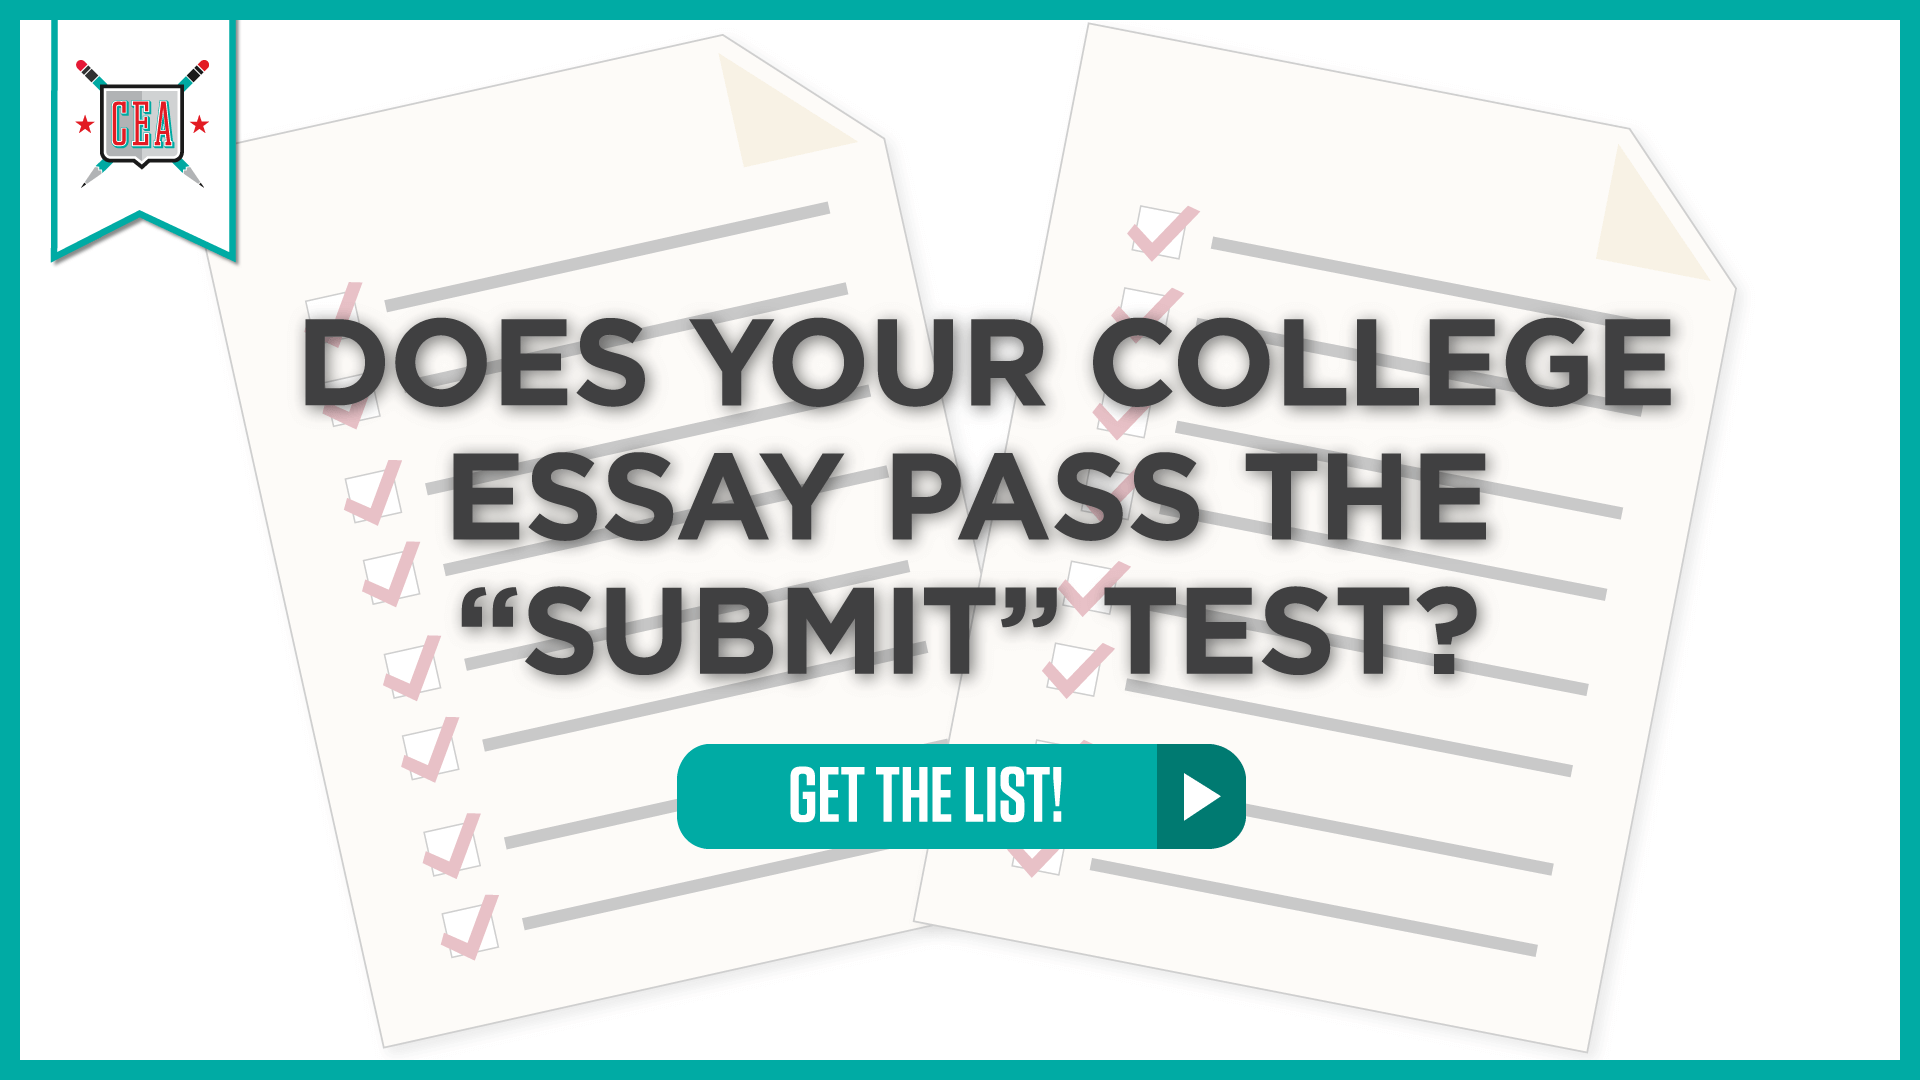 Does Your College Essay Pass the “Submit” Test? 